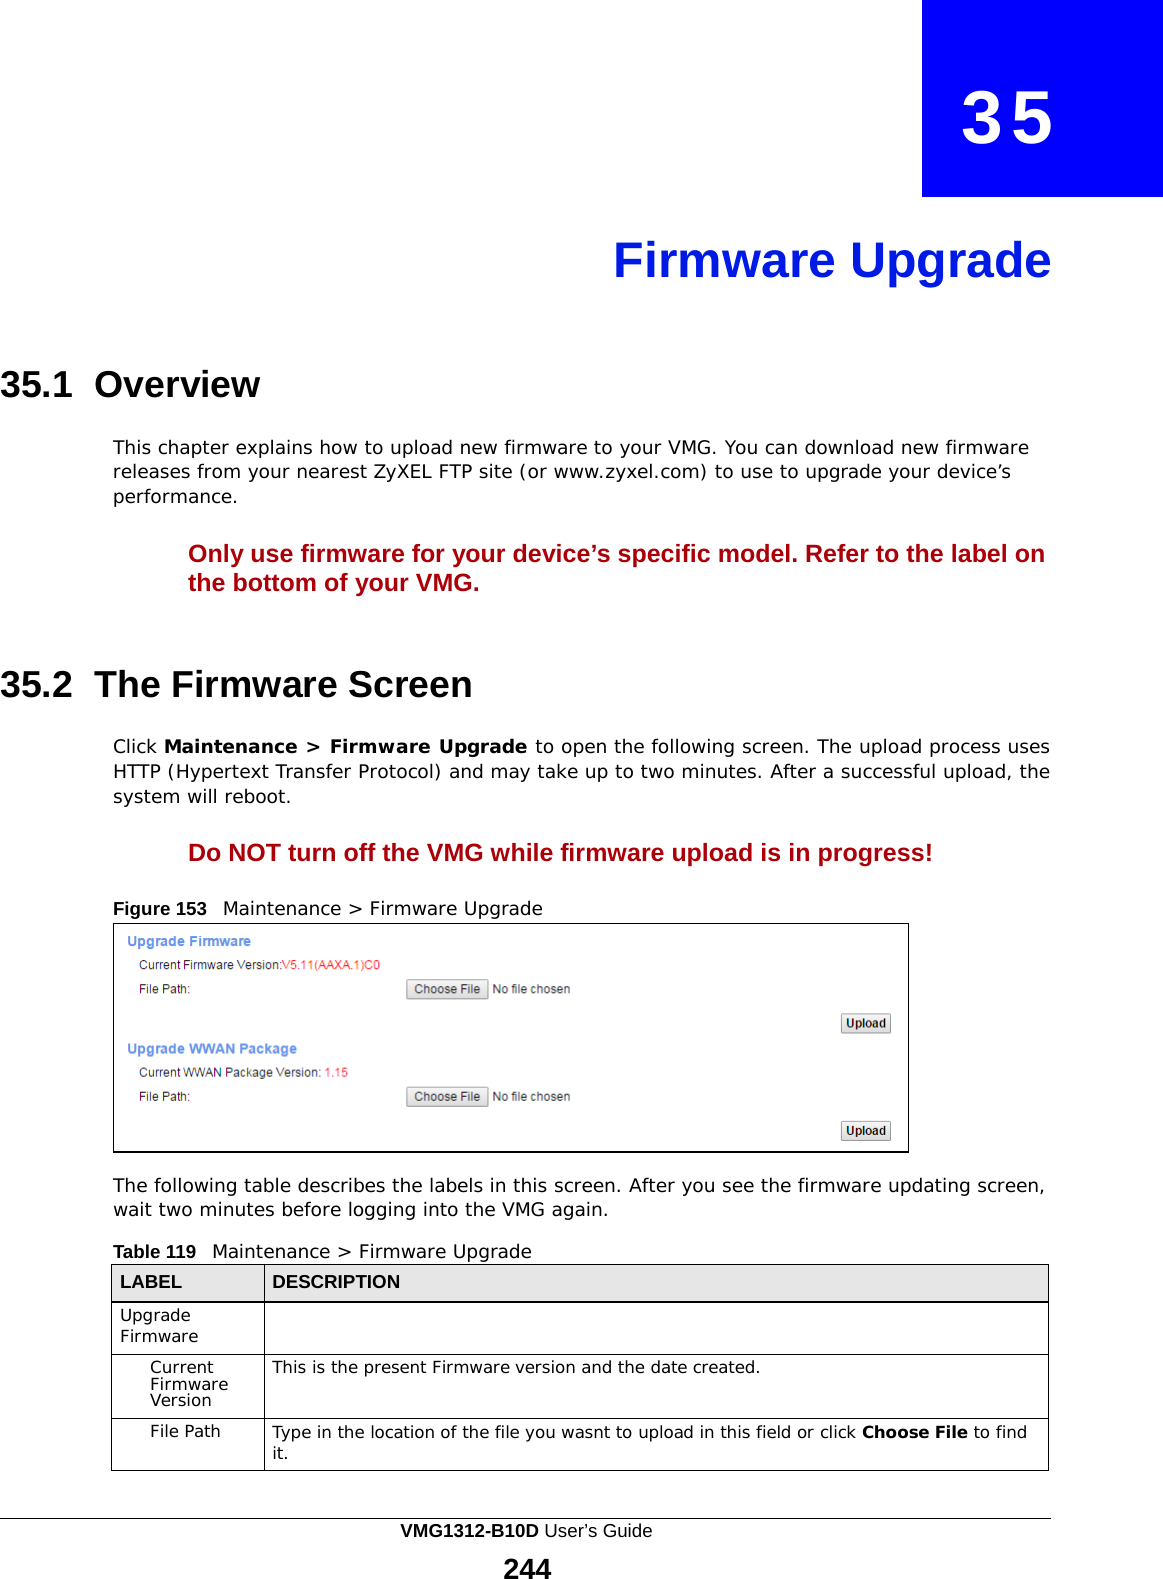    35     Firmware Upgrade     35.1 Overview  This chapter explains how to upload new firmware to your VMG. You can download new firmware releases from your nearest ZyXEL FTP site (or www.zyxel.com) to use to upgrade your device’s performance.  Only use firmware for your device’s specific model. Refer to the label on the bottom of your VMG.    35.2  The Firmware Screen  Click Maintenance &gt; Firmware Upgrade to open the following screen. The upload process uses HTTP (Hypertext Transfer Protocol) and may take up to two minutes. After a successful upload, the system will reboot.  Do NOT turn off the VMG while firmware upload is in progress!  Figure 153   Maintenance &gt; Firmware Upgrade             The following table describes the labels in this screen. After you see the firmware updating screen, wait two minutes before logging into the VMG again.  Table 119   Maintenance &gt; Firmware Upgrade  LABEL DESCRIPTION Upgrade Firmware  Current Firmware Version This is the present Firmware version and the date created. File Path Type in the location of the file you wasnt to upload in this field or click Choose File to find it. VMG1312-B10D User’s Guide 244  